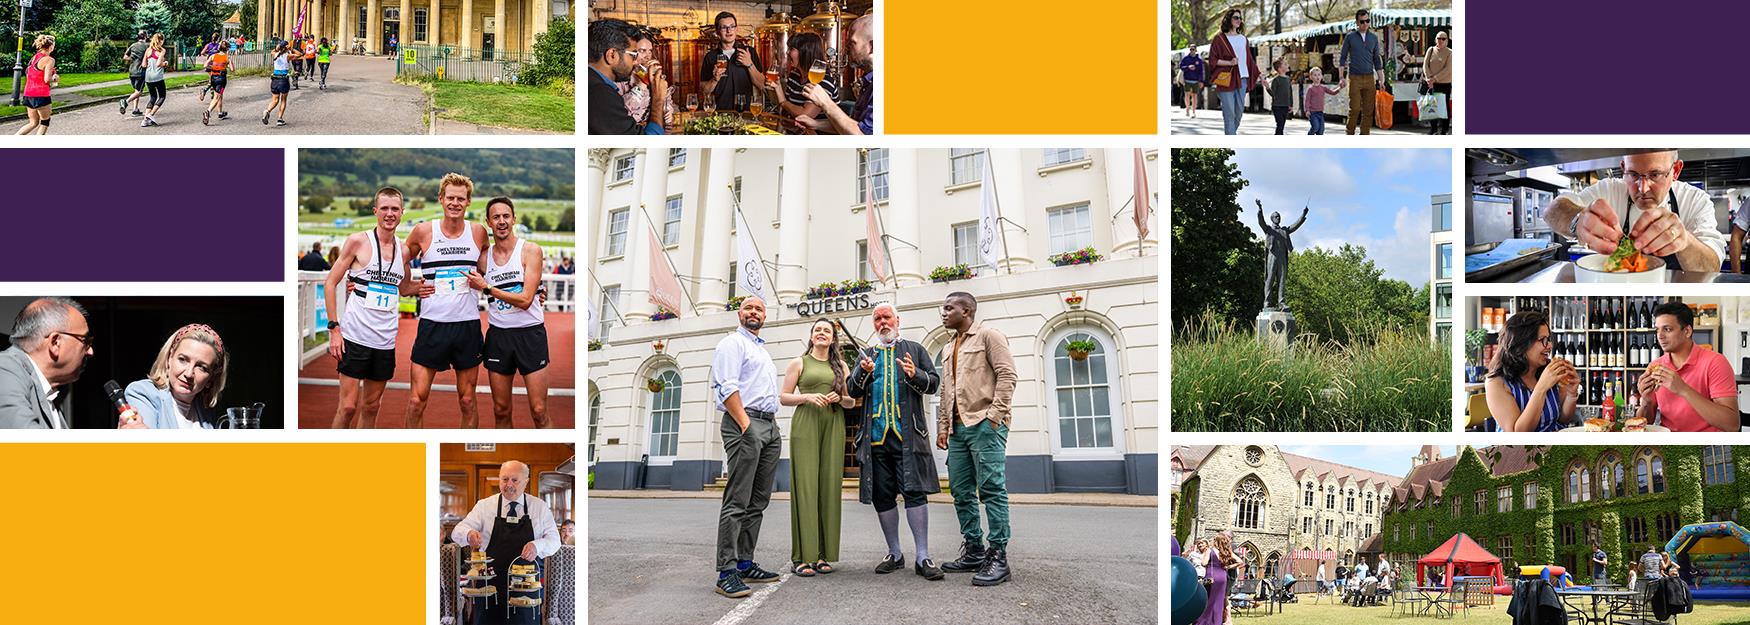 A collage of September events and activities in Cheltenham